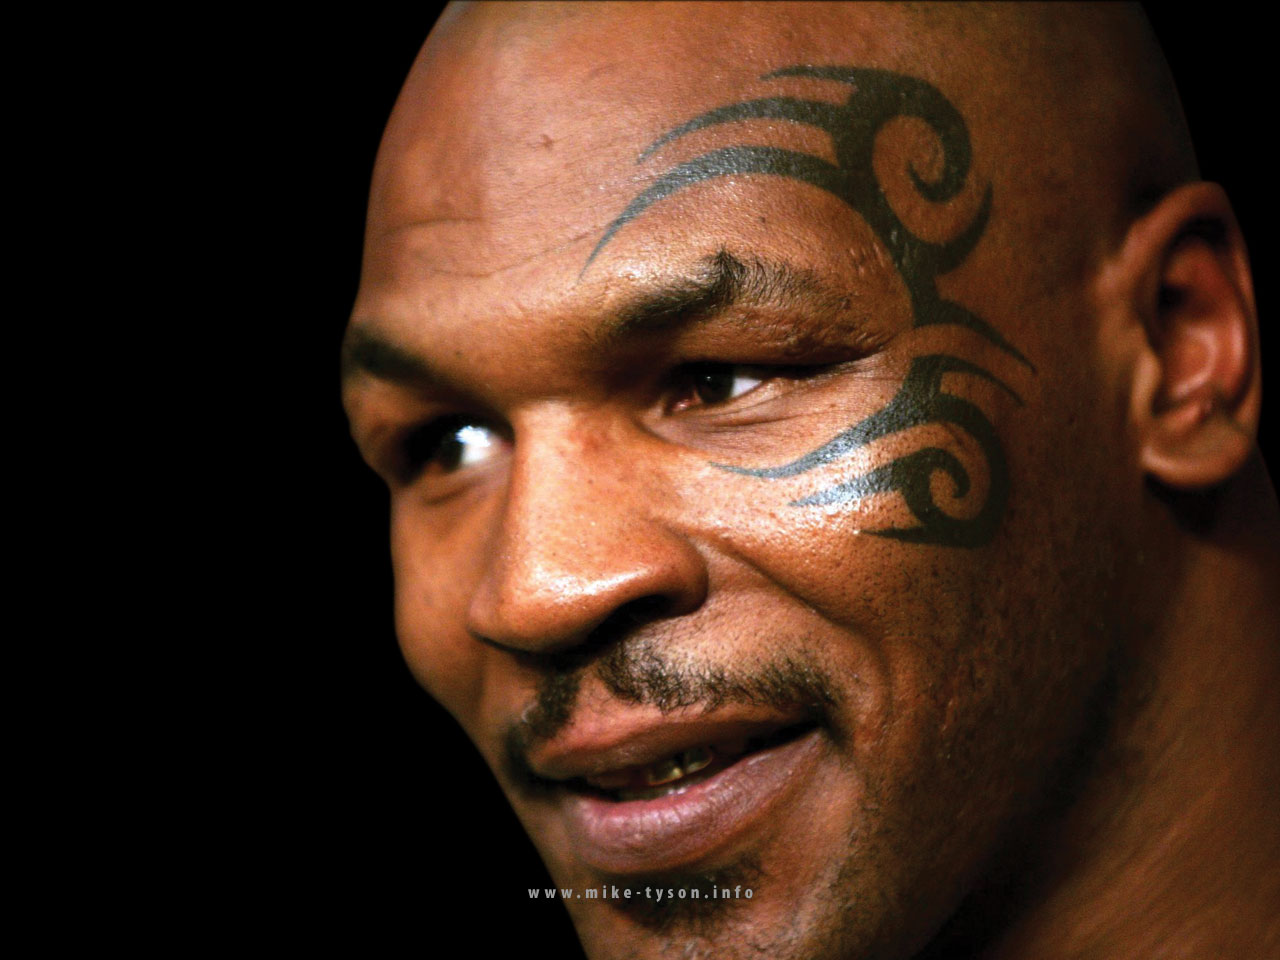 Mike-Tyson-Face-Tattoos : Gucci Mane Tattoo Face Photos, Wallpapers, 